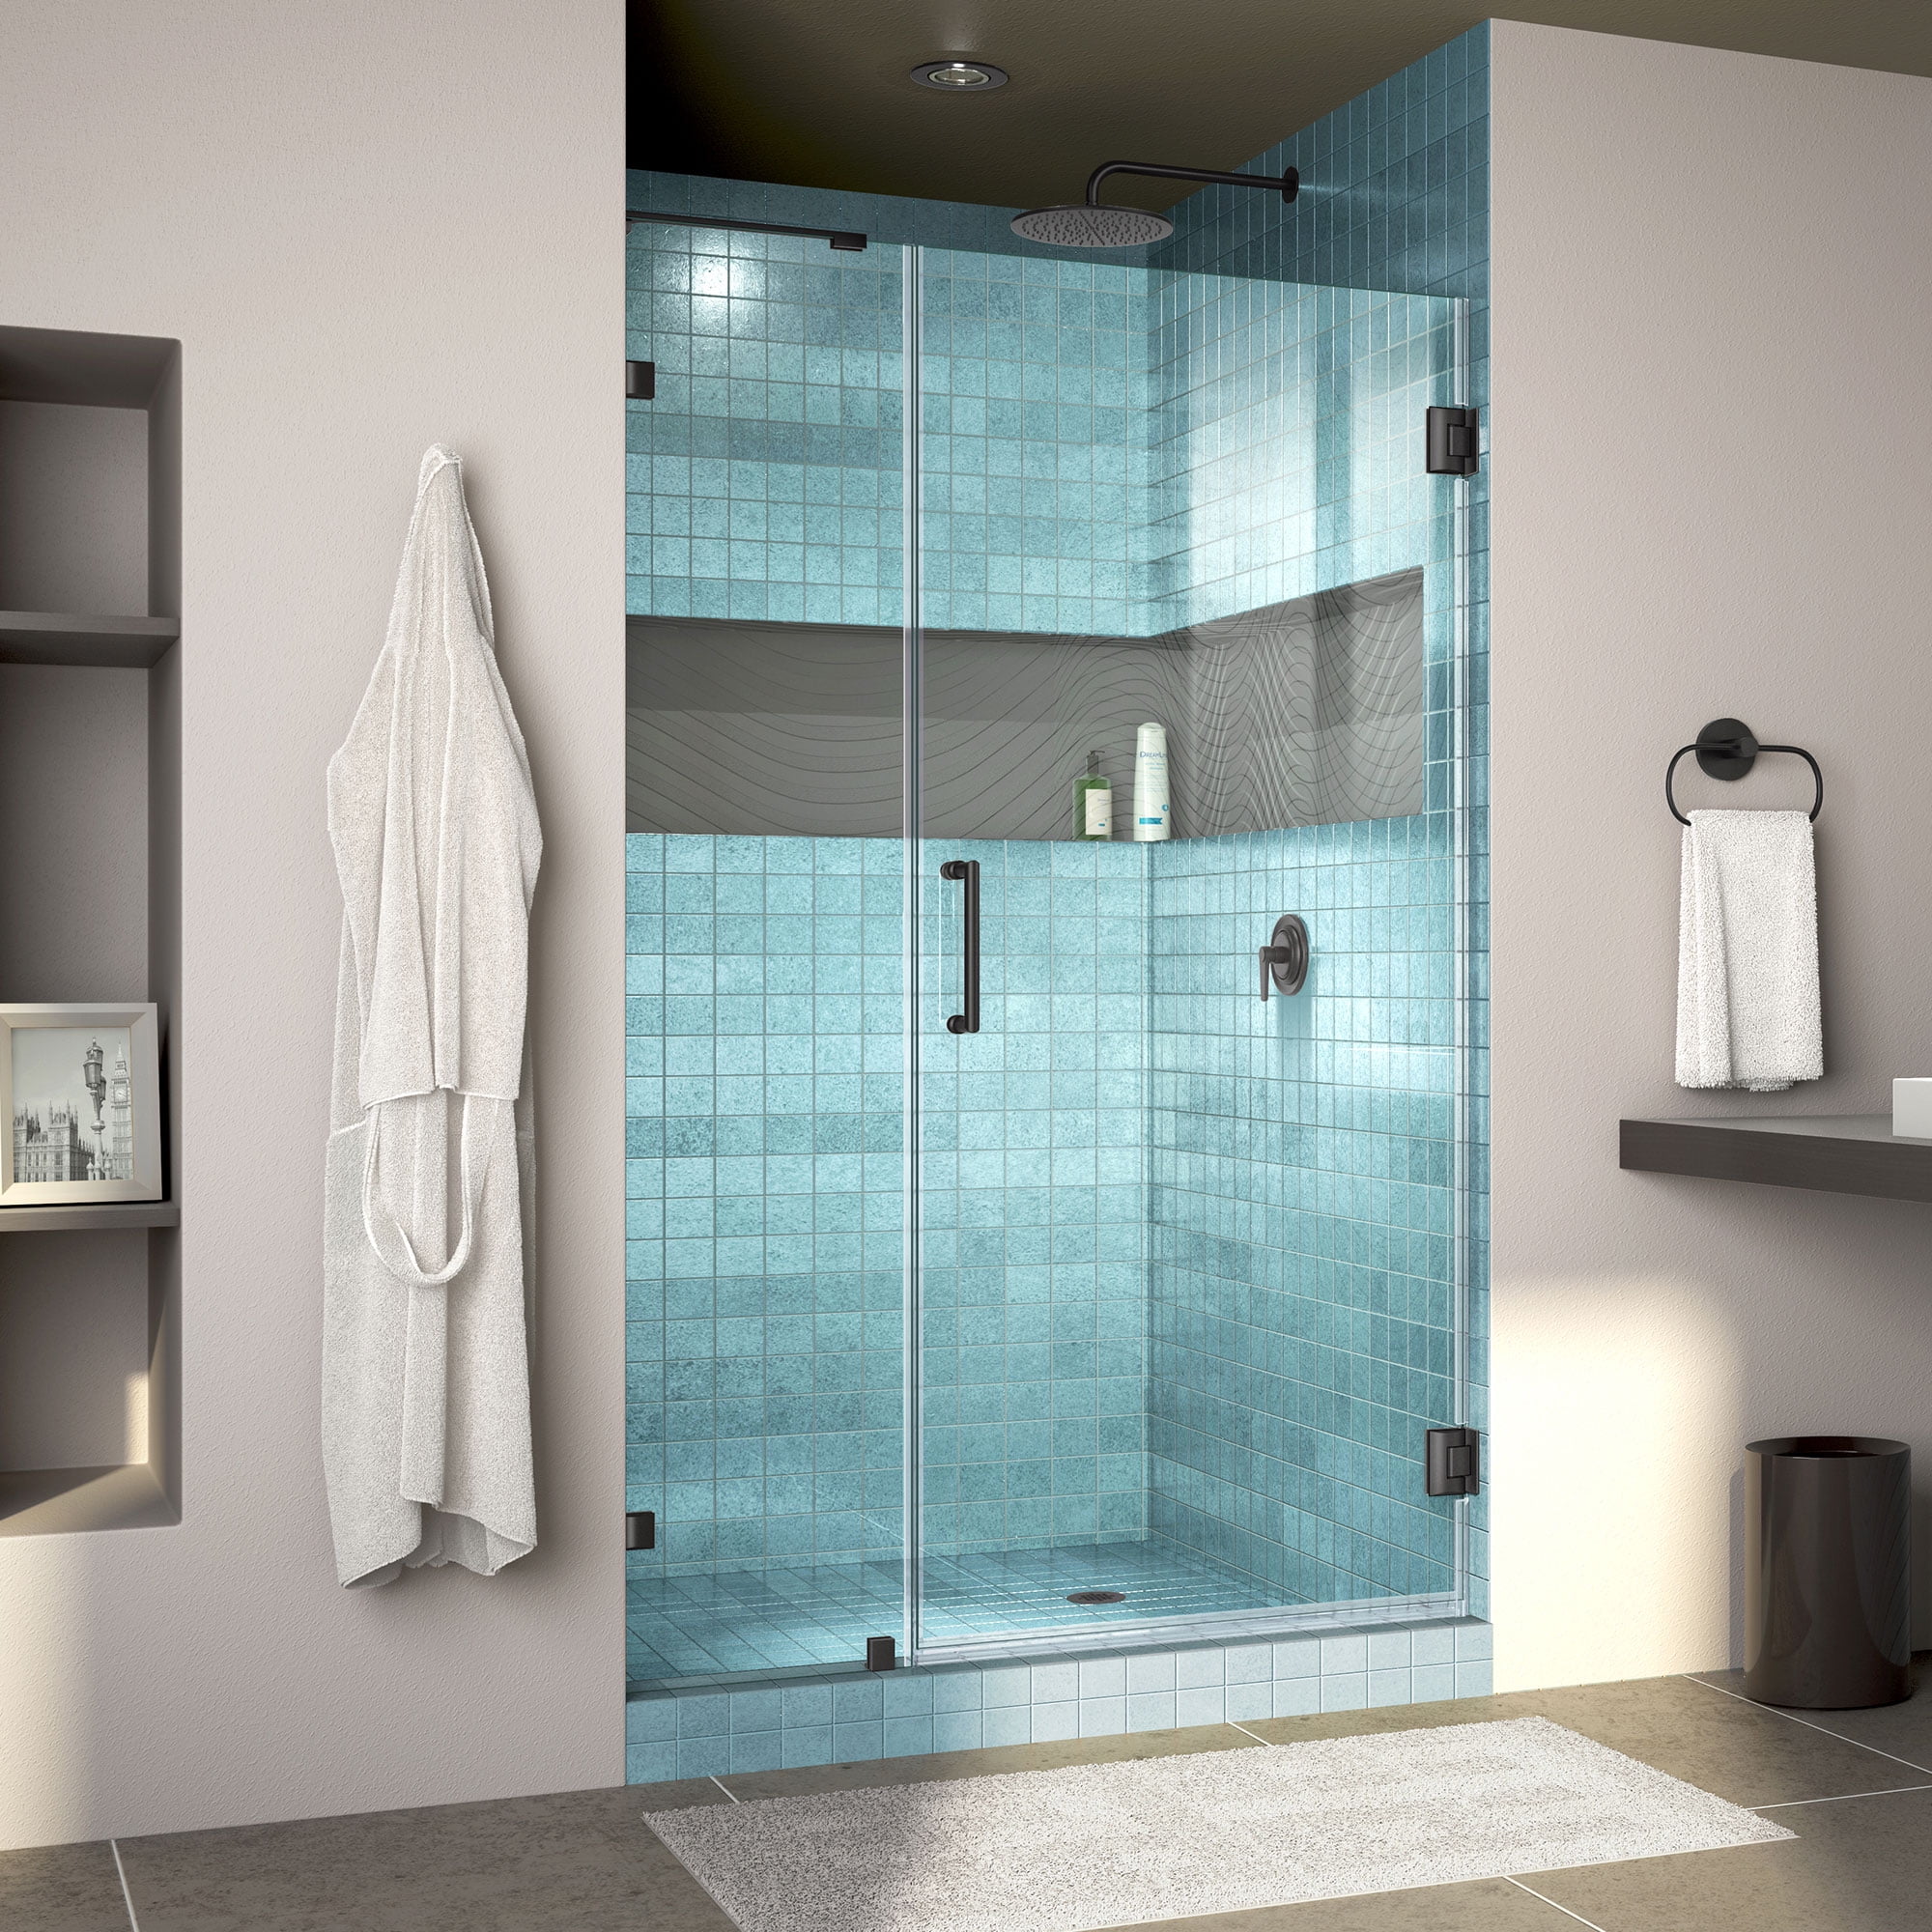 DreamLine Unidoor Lux 41 in. W x 72 in. H Fully Frameless Hinged Shower Door with L-Bar in Satin Black